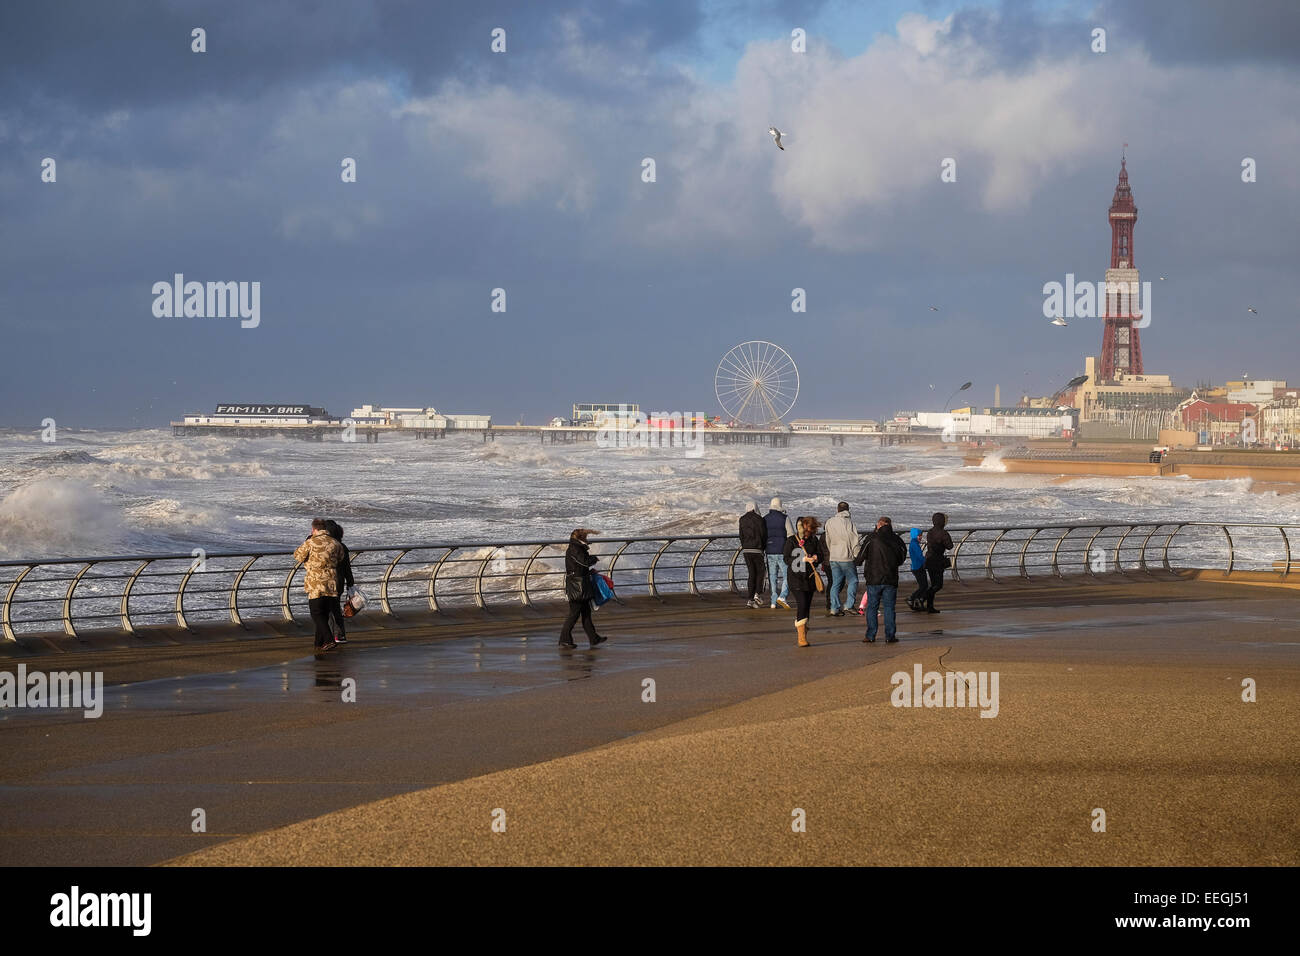 Blackpool, Lancashire: A bracing walk along Blackpool's promenade during gales and high-tide. Stock Photo